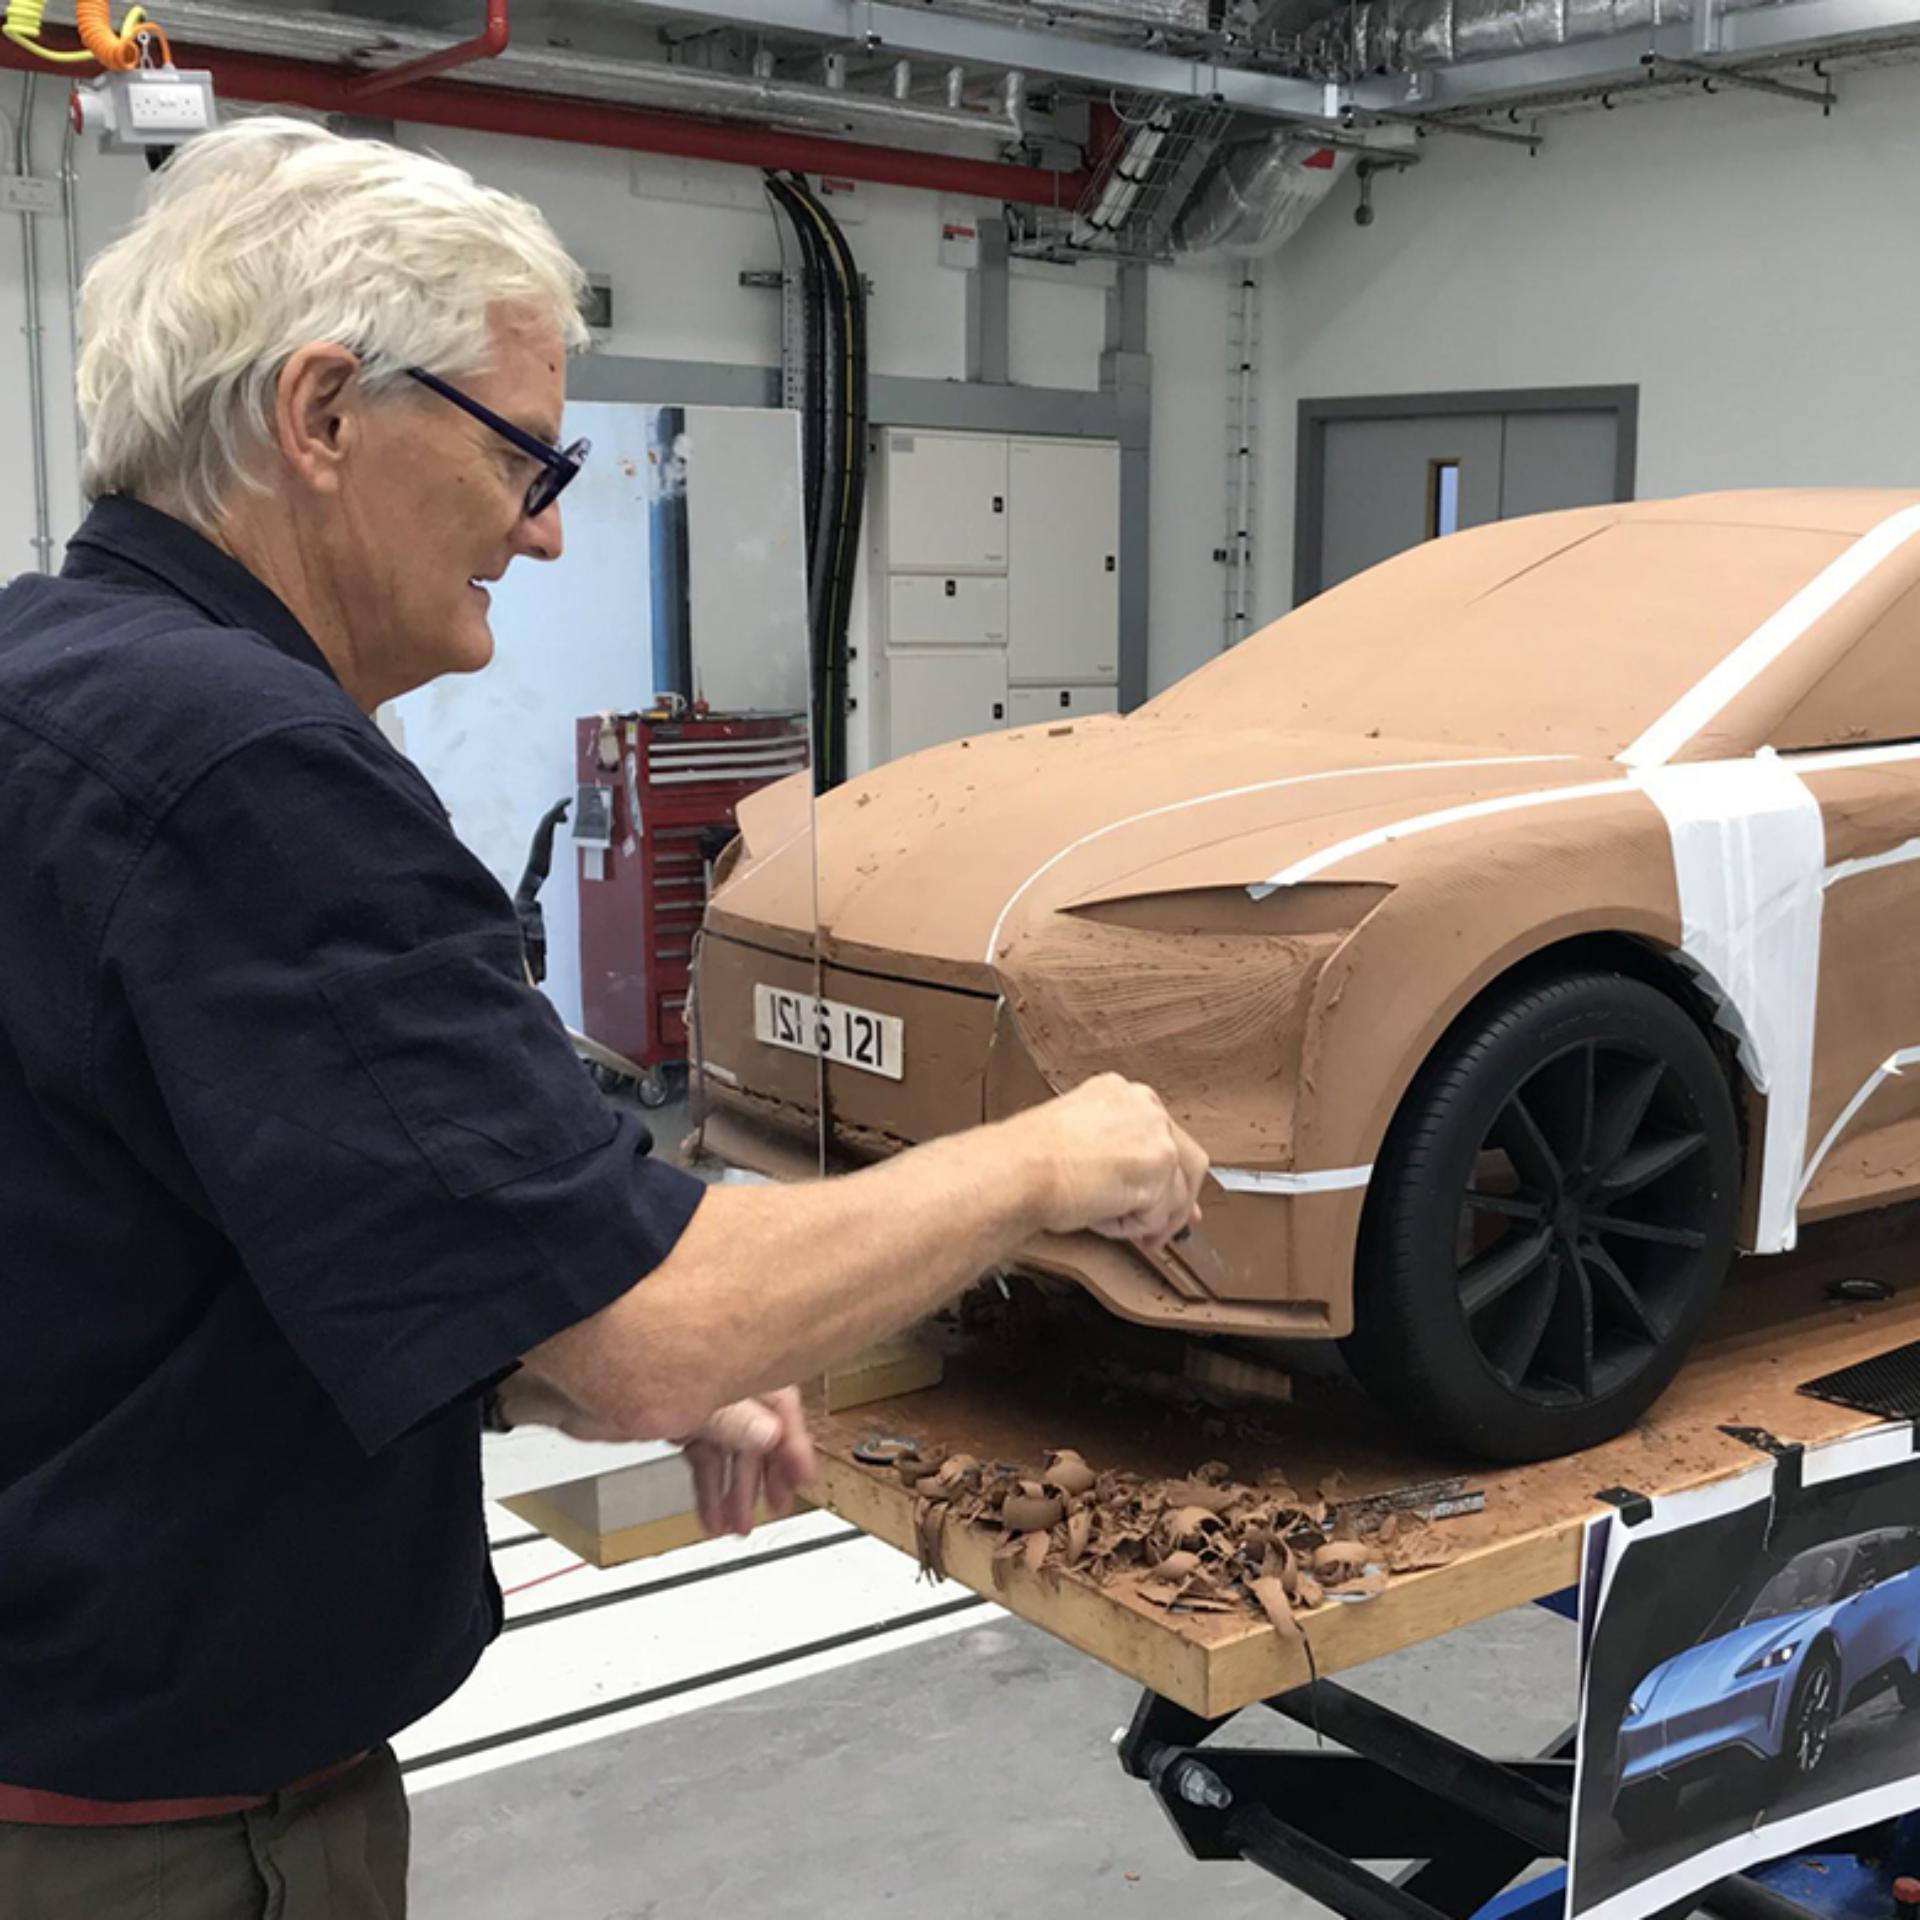 James Dyson modelling the front of the car out of clay